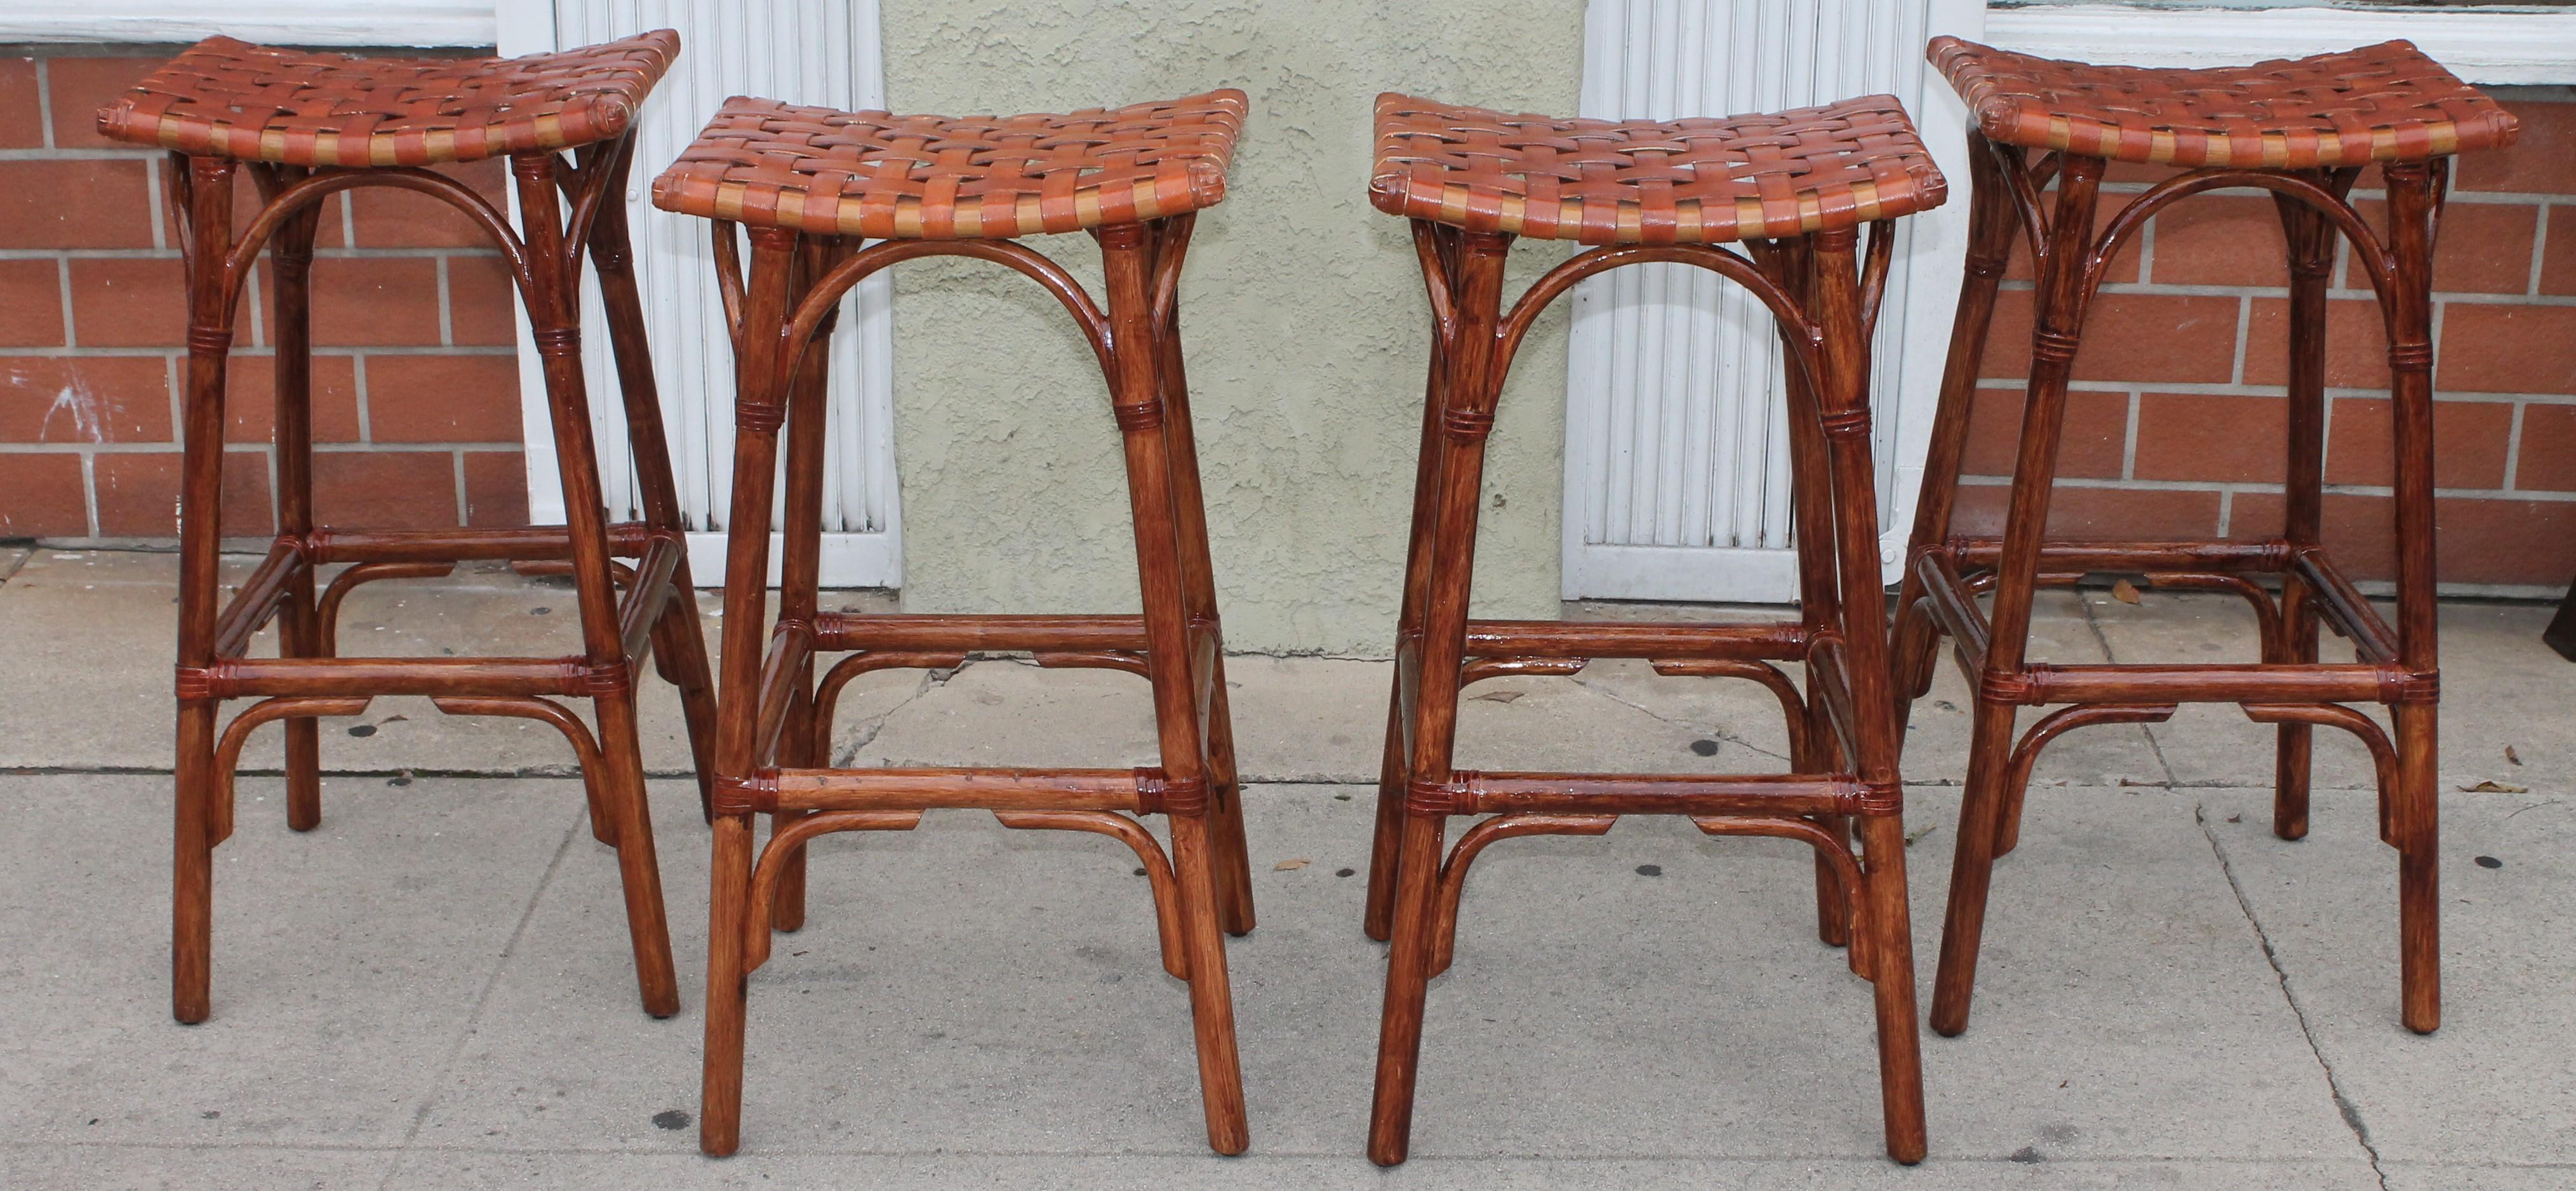 These Mid-Century Modern bamboo bar stools are in fine condition and have handwoven leather seats. They are counter or bar height. Super comfortable.